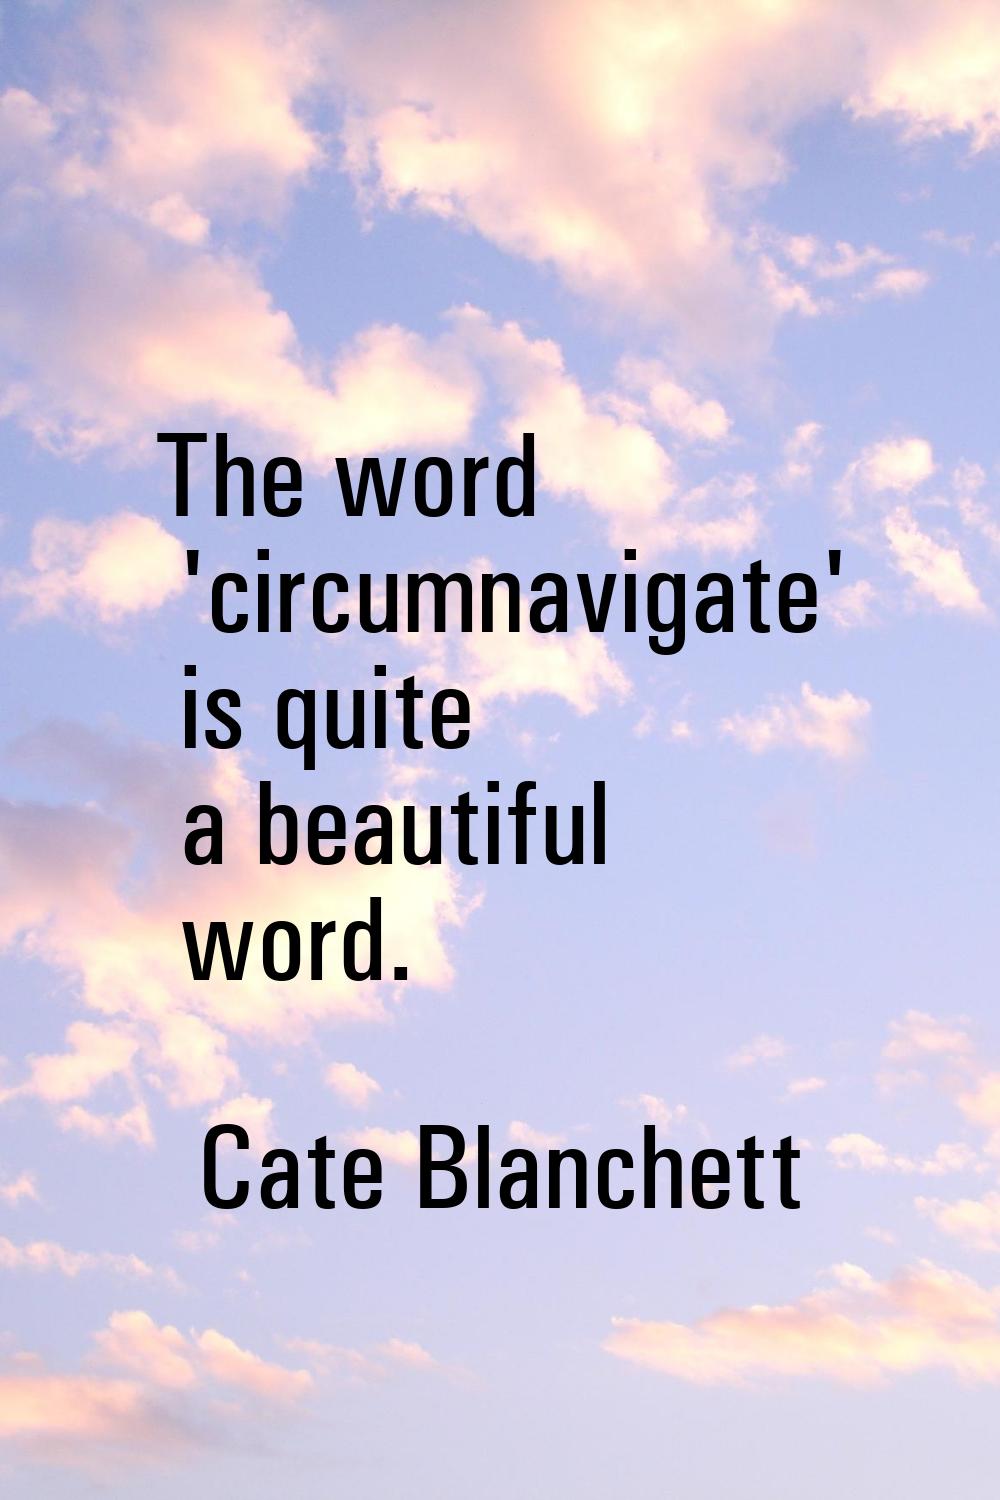 The word 'circumnavigate' is quite a beautiful word.